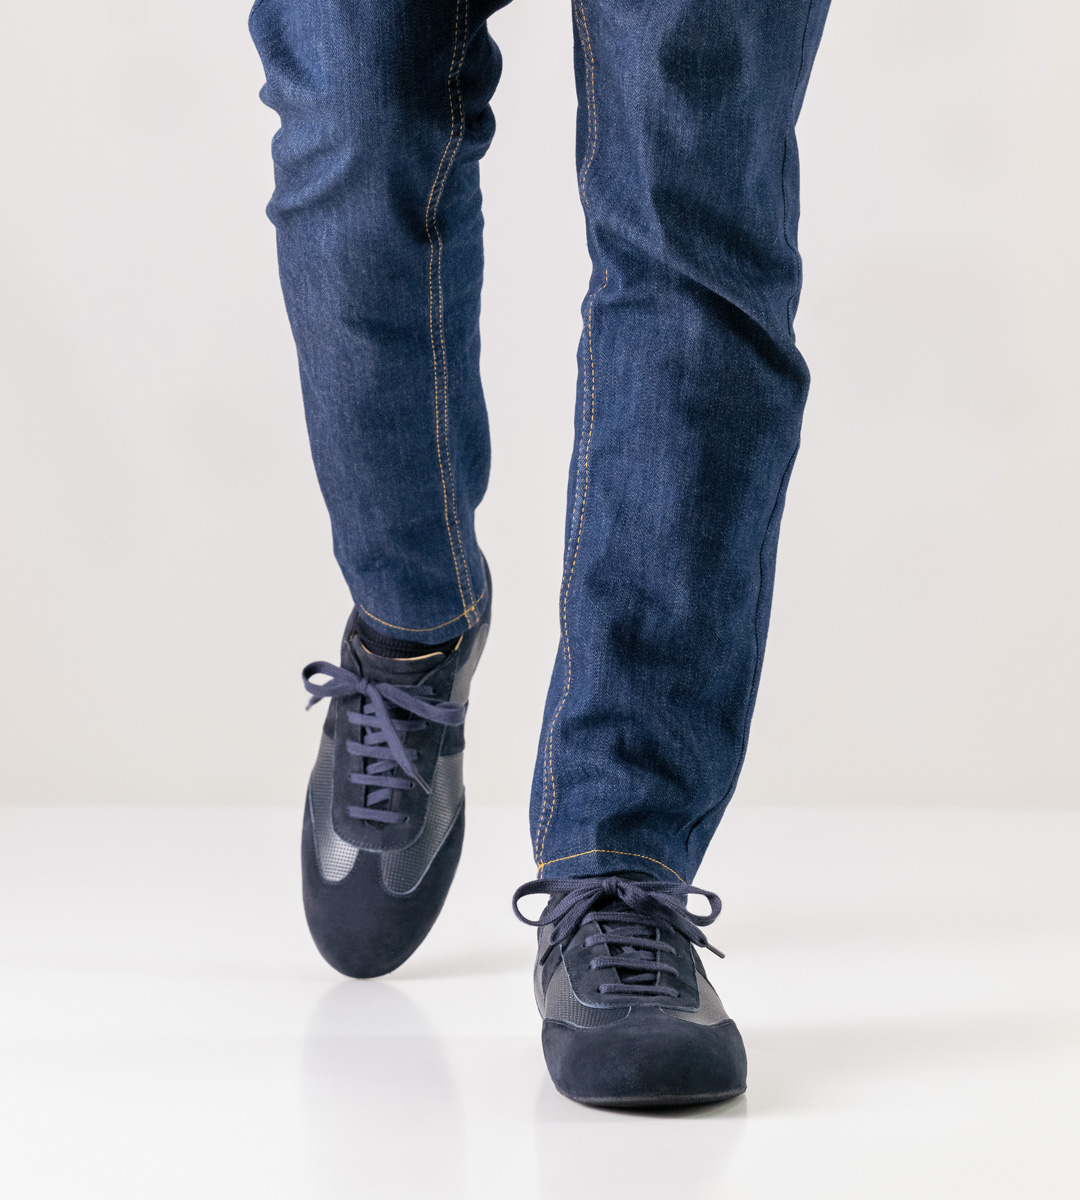 blue jeans in combination with blue men's dance shoe for loose insoles